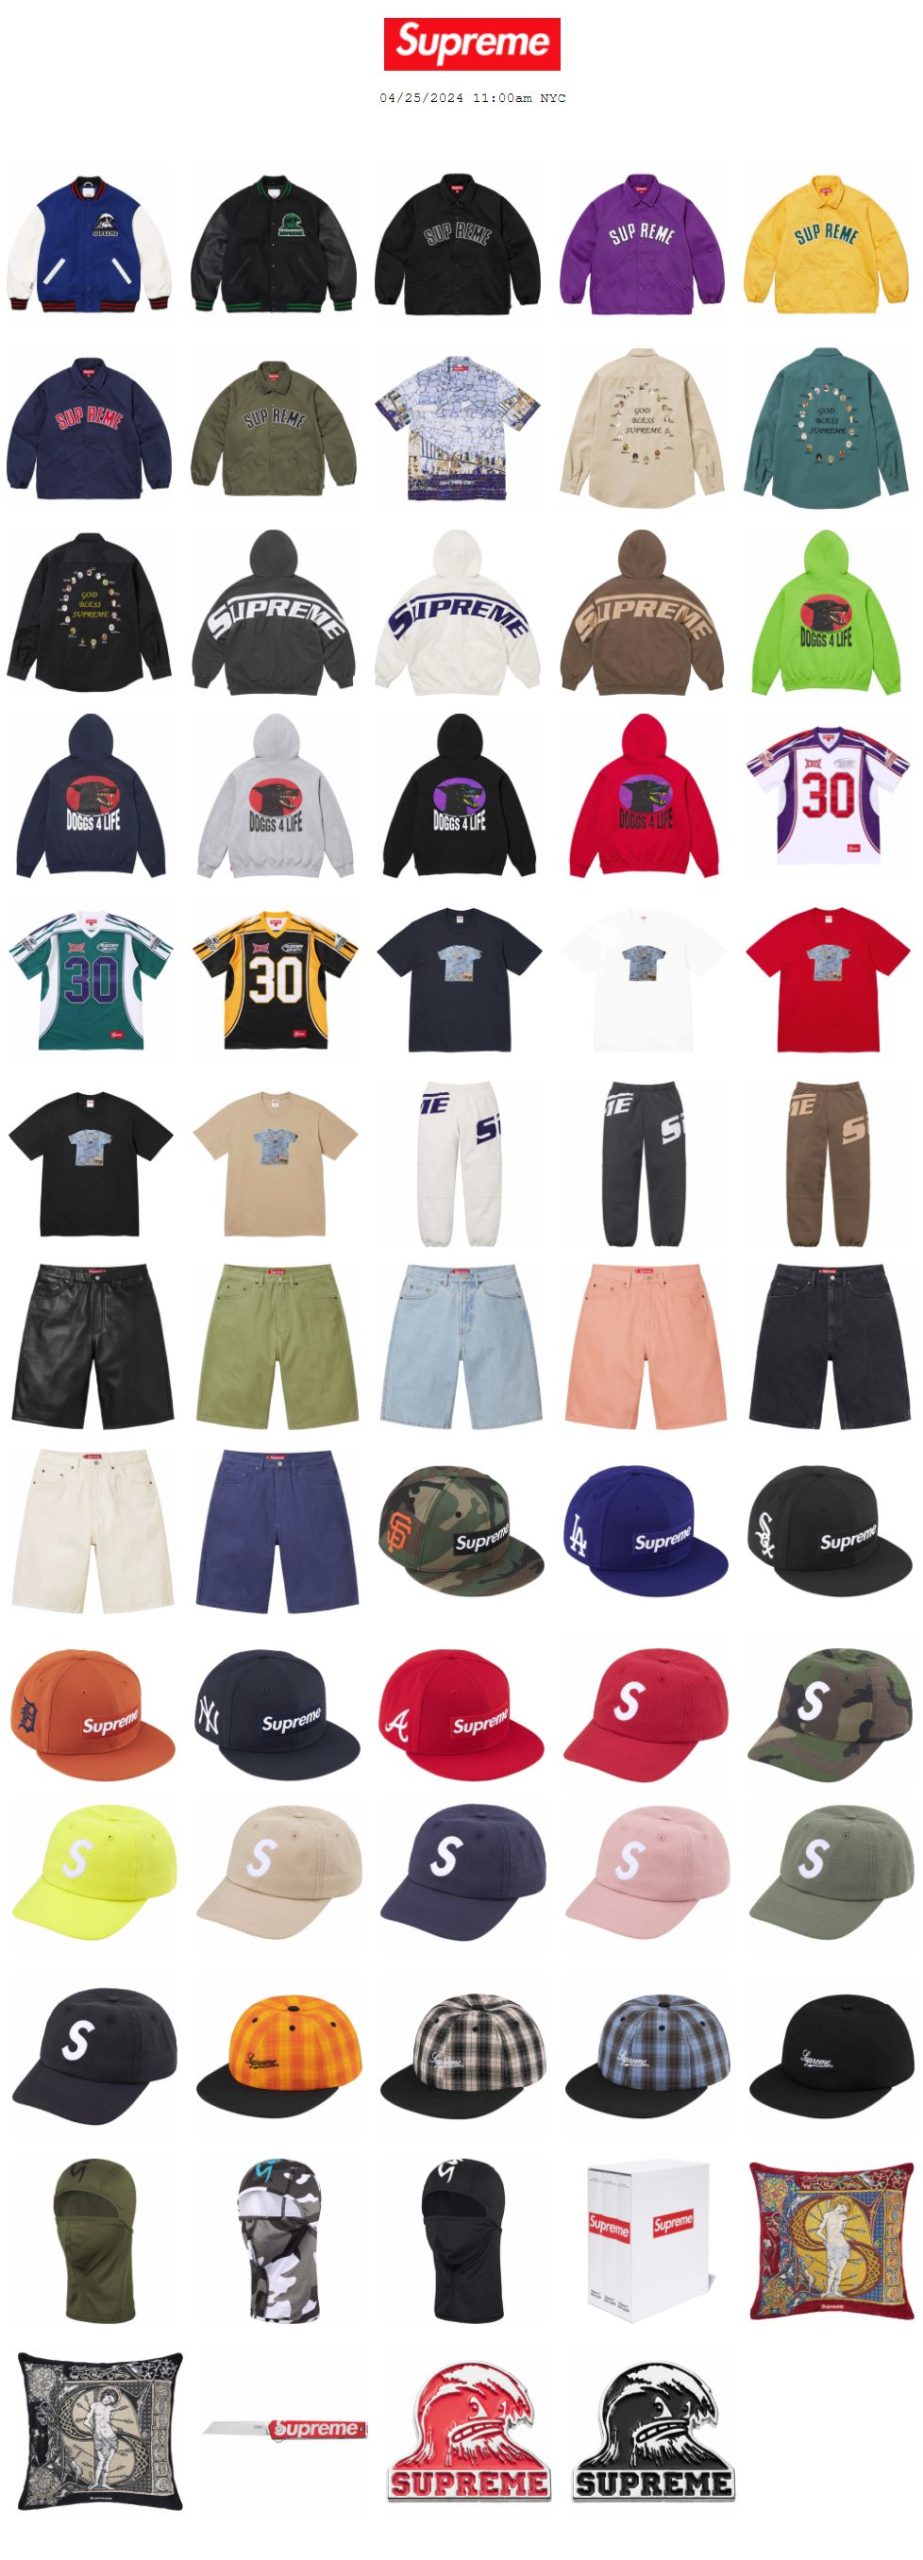 Supreme 公式通販サイトで4月27日 Week11に発売予定の24SS 新作 ...